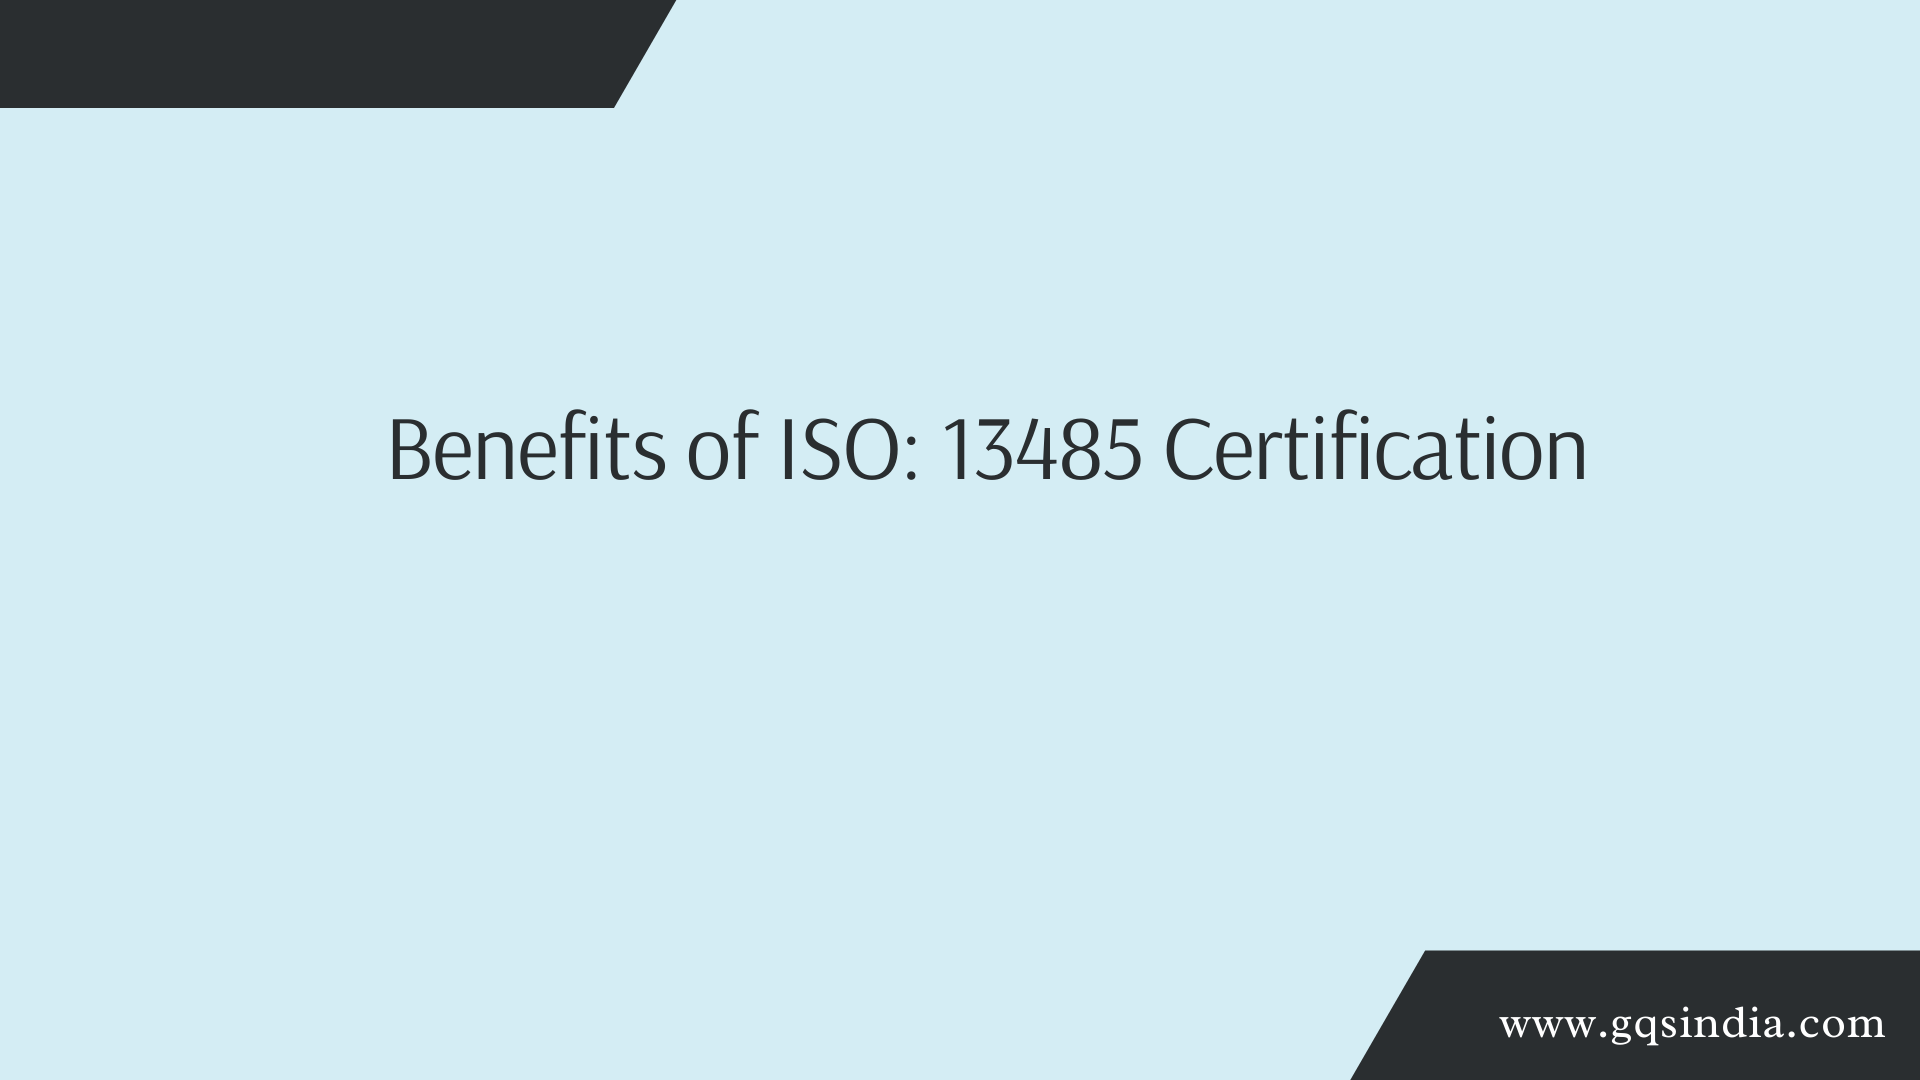 Benefits of ISO: 13485 Certification